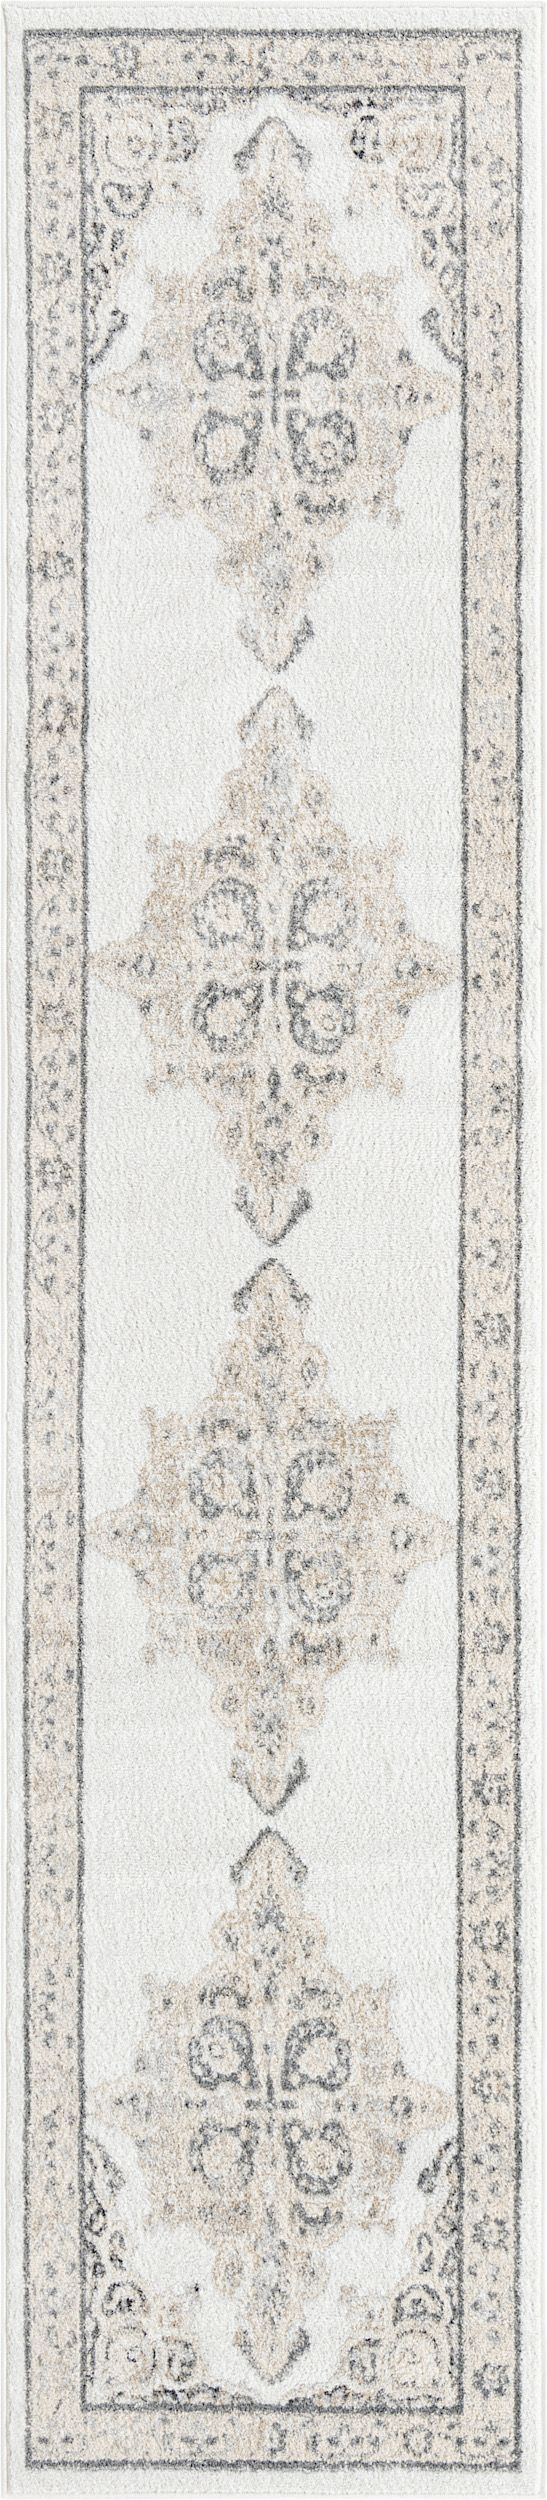 rugpal troayurgh traditional area rug collection